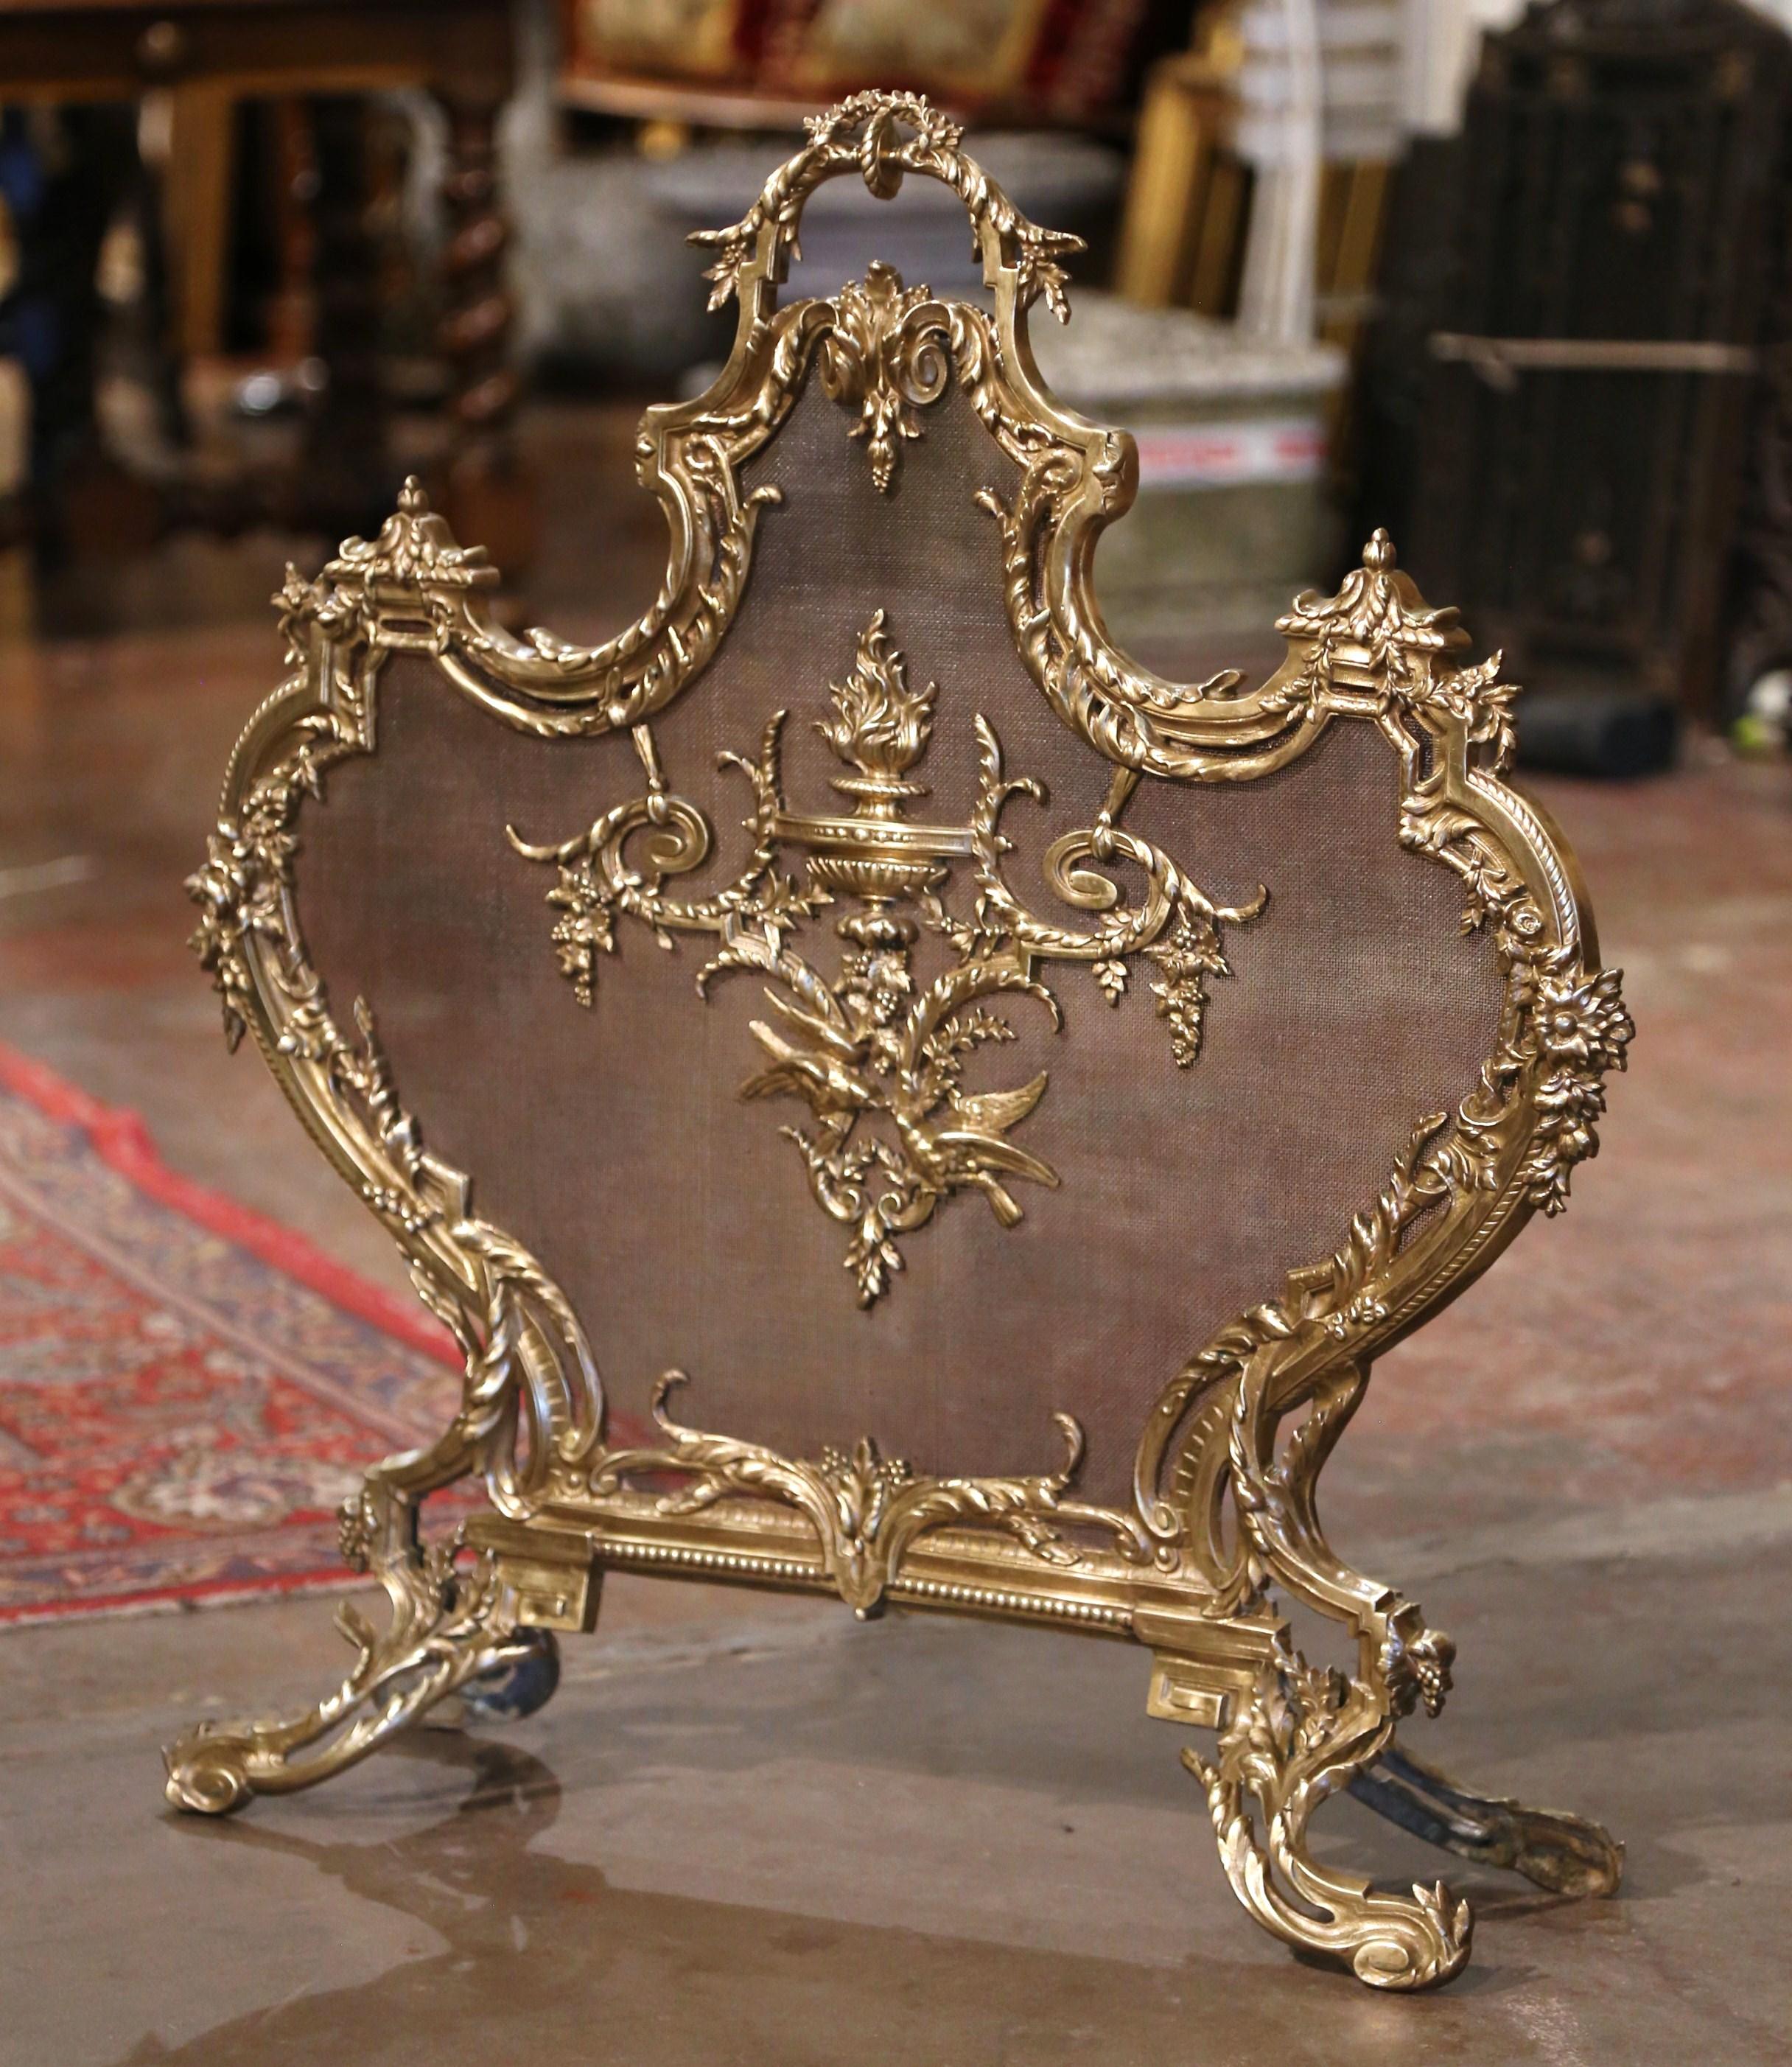 Decorate your fireplace with this elegant antique screen. Crafted in France circa 1870 and made of bronze, the shaped screen sits on four scrolled and leaf form feet; the screen features a central medallion with traditional Louis XV motifs including